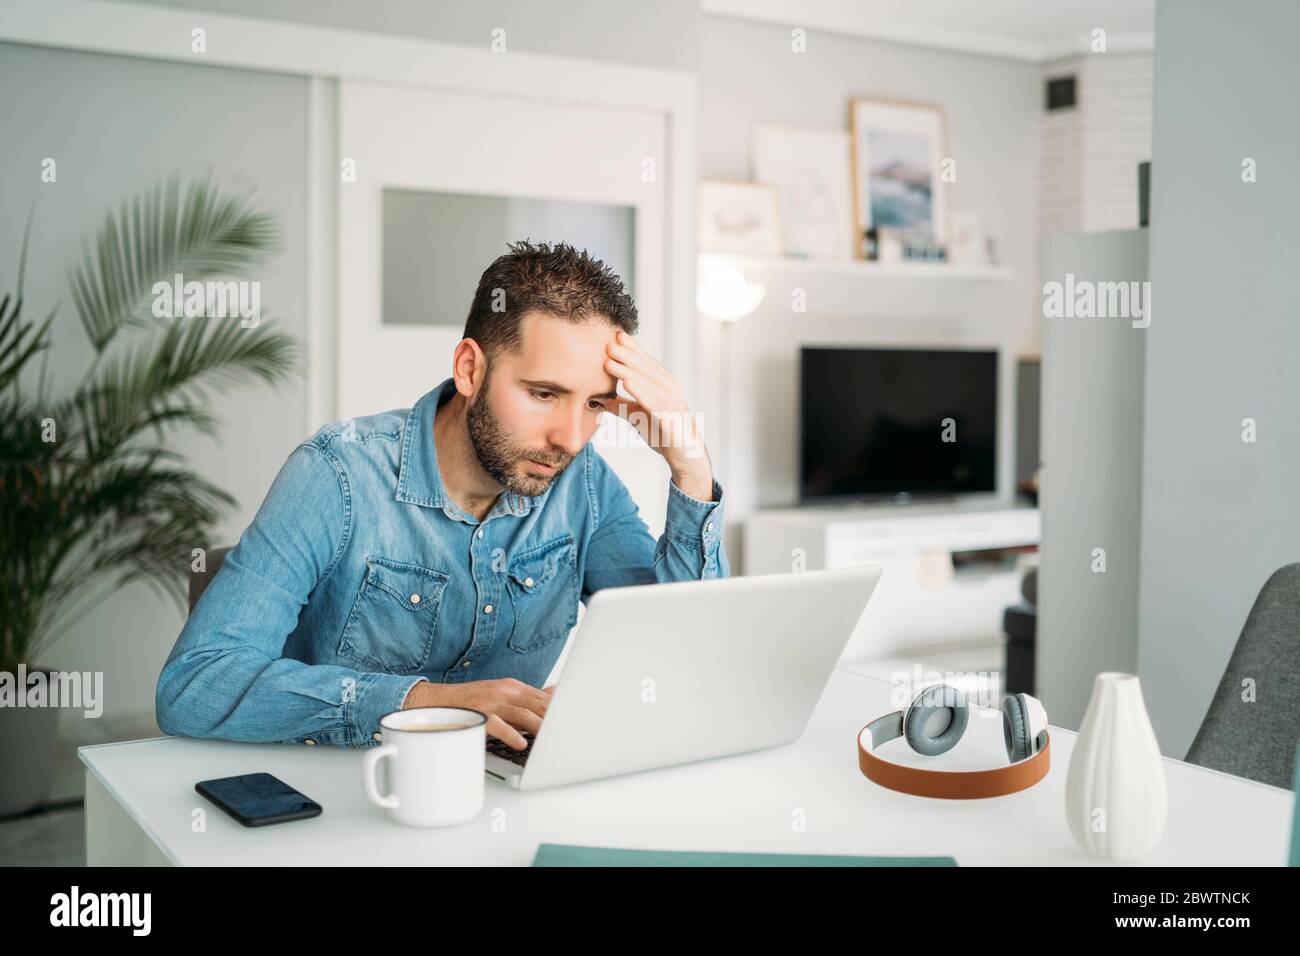 Mid adult man working from home during coronavirus pandemic outbreak, Almeria, Spain, Europe Stock Photo